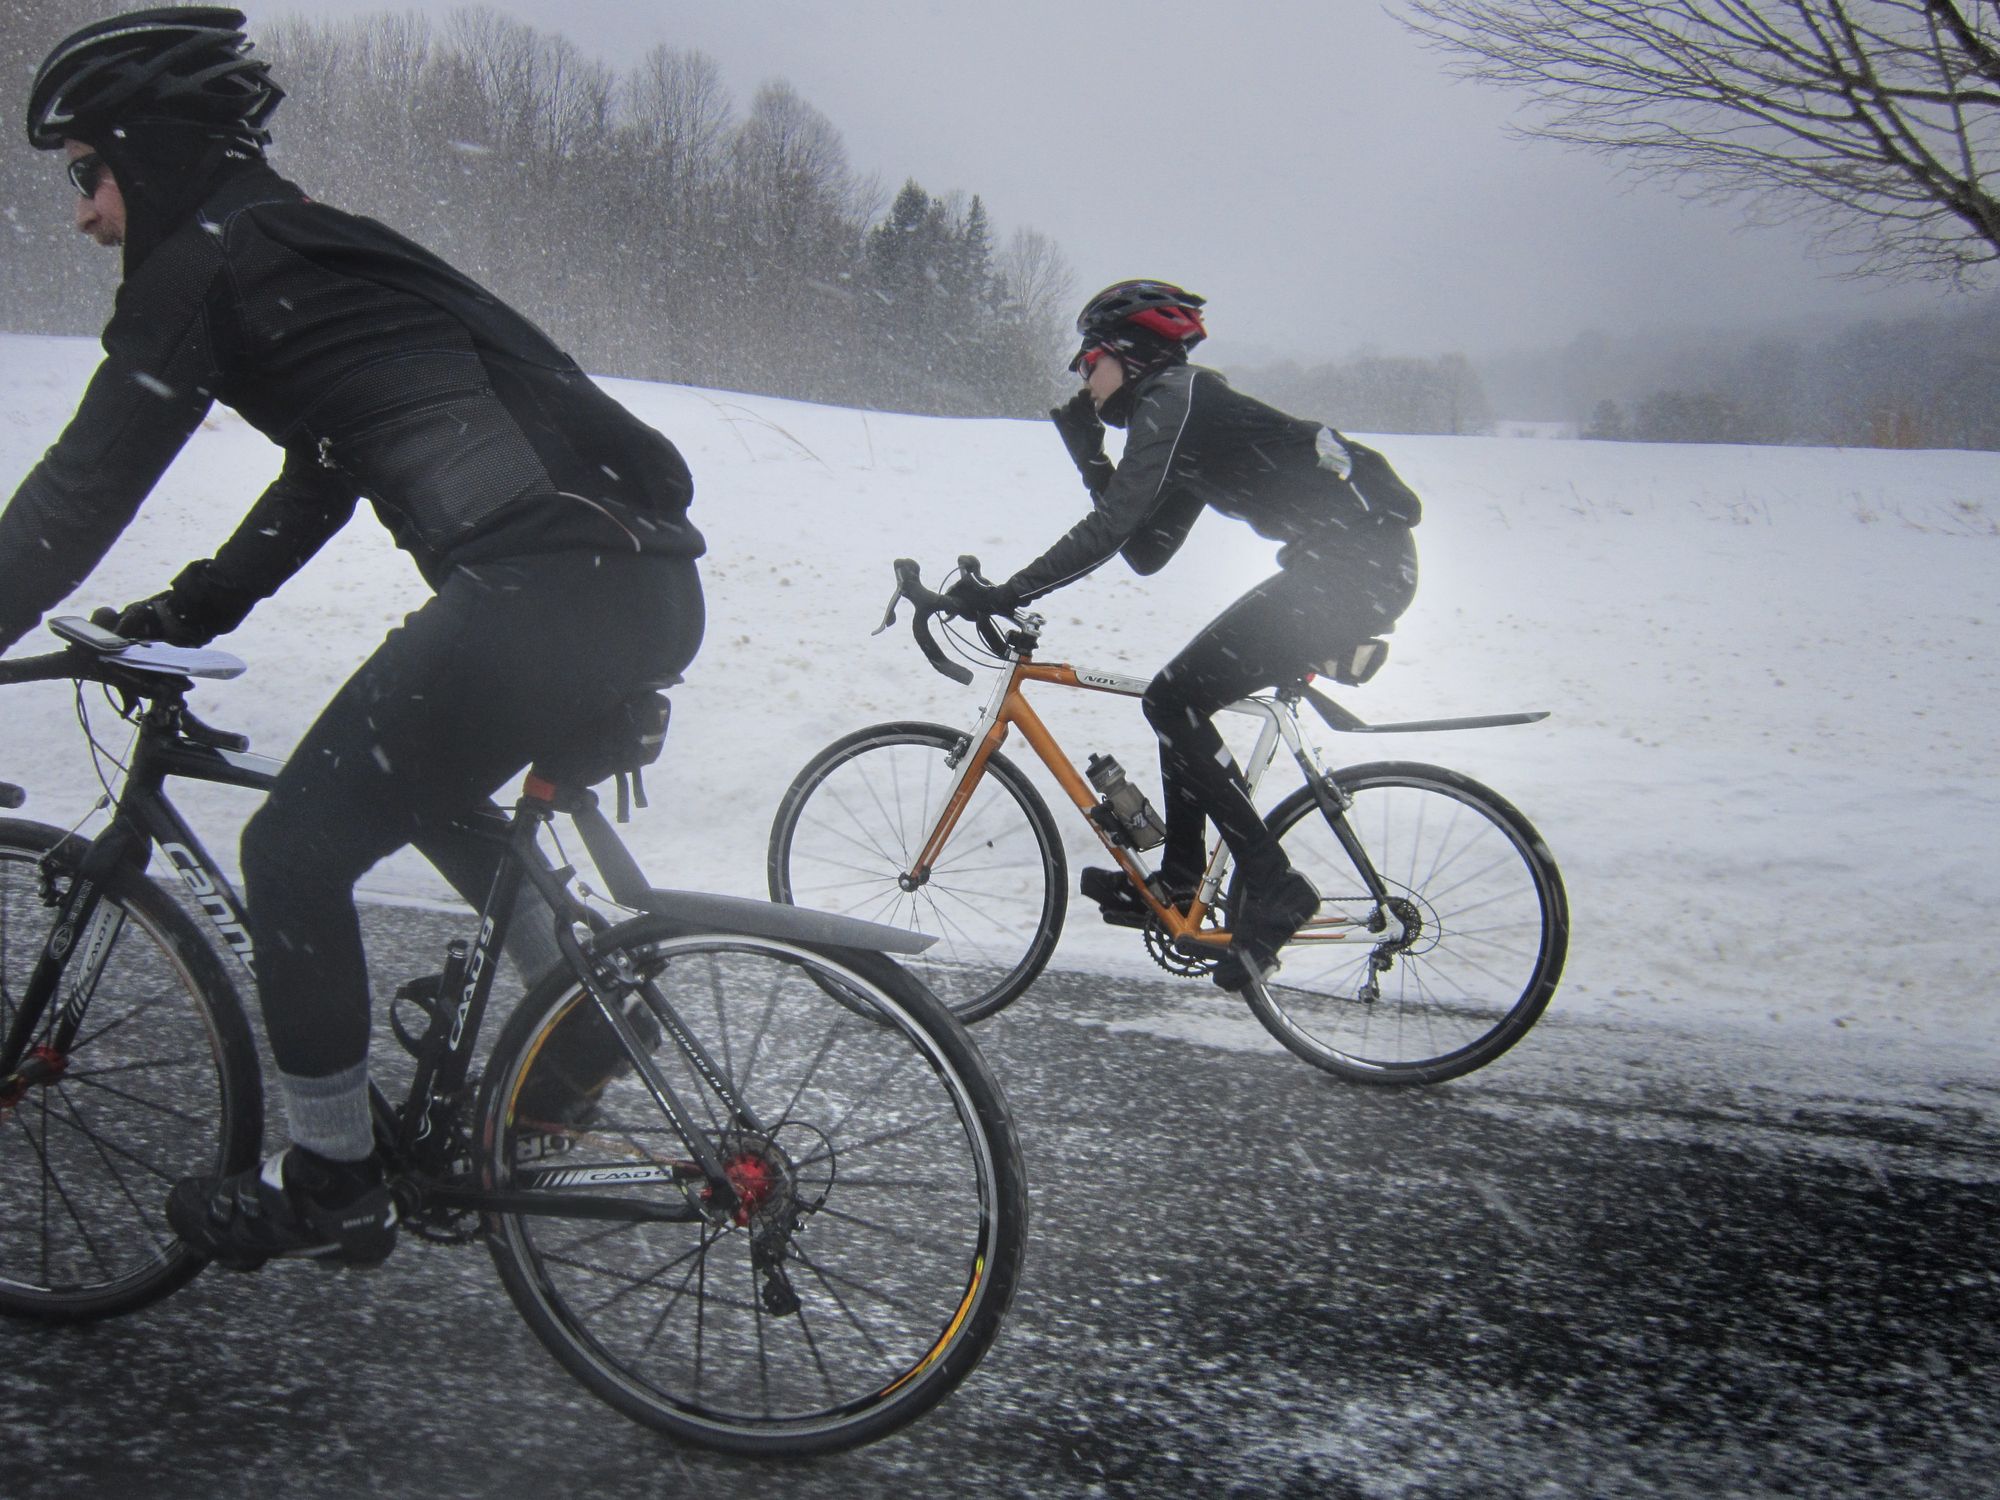 https://hips.hearstapps.com/hmg-prod/images/cyclists-in-a-snow-storm-high-res-stock-photography-670299581-1565645517.jpg